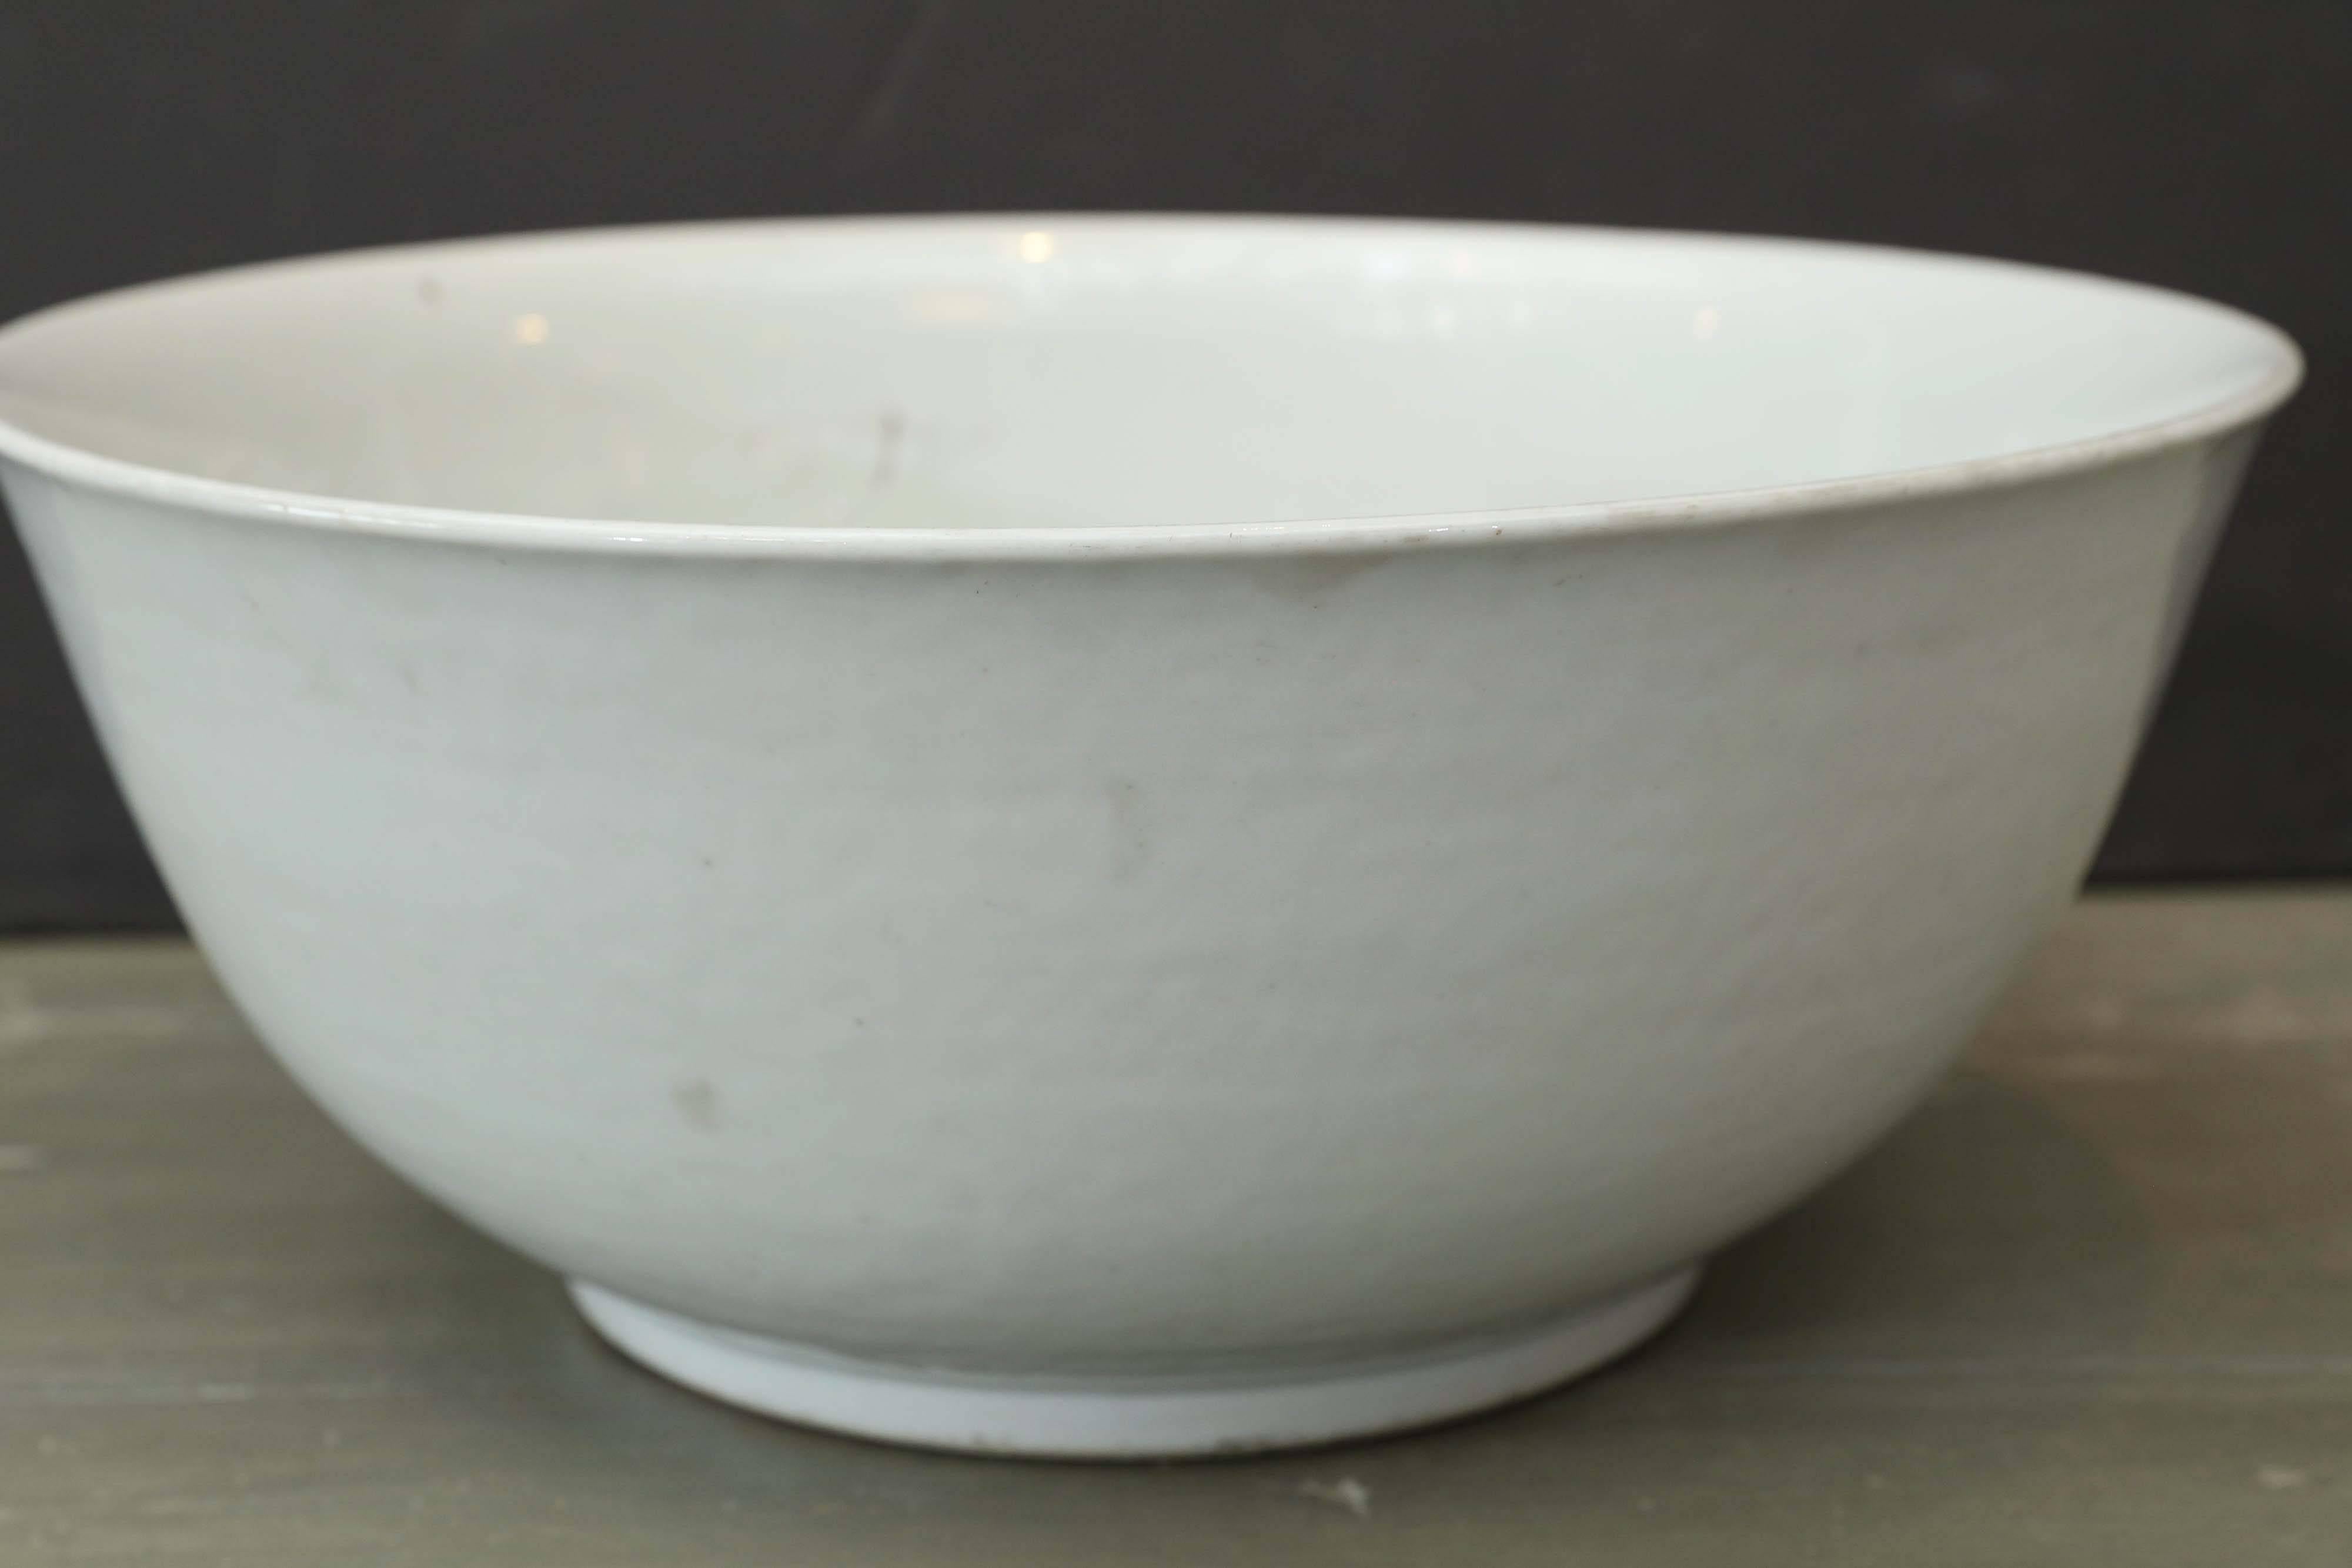 19th century white porcelain bowl from the Qing dynasty era in China. Note the irregular line to the edge of the bowl. Rust spots and firing imperfections support the age of the porcelains.